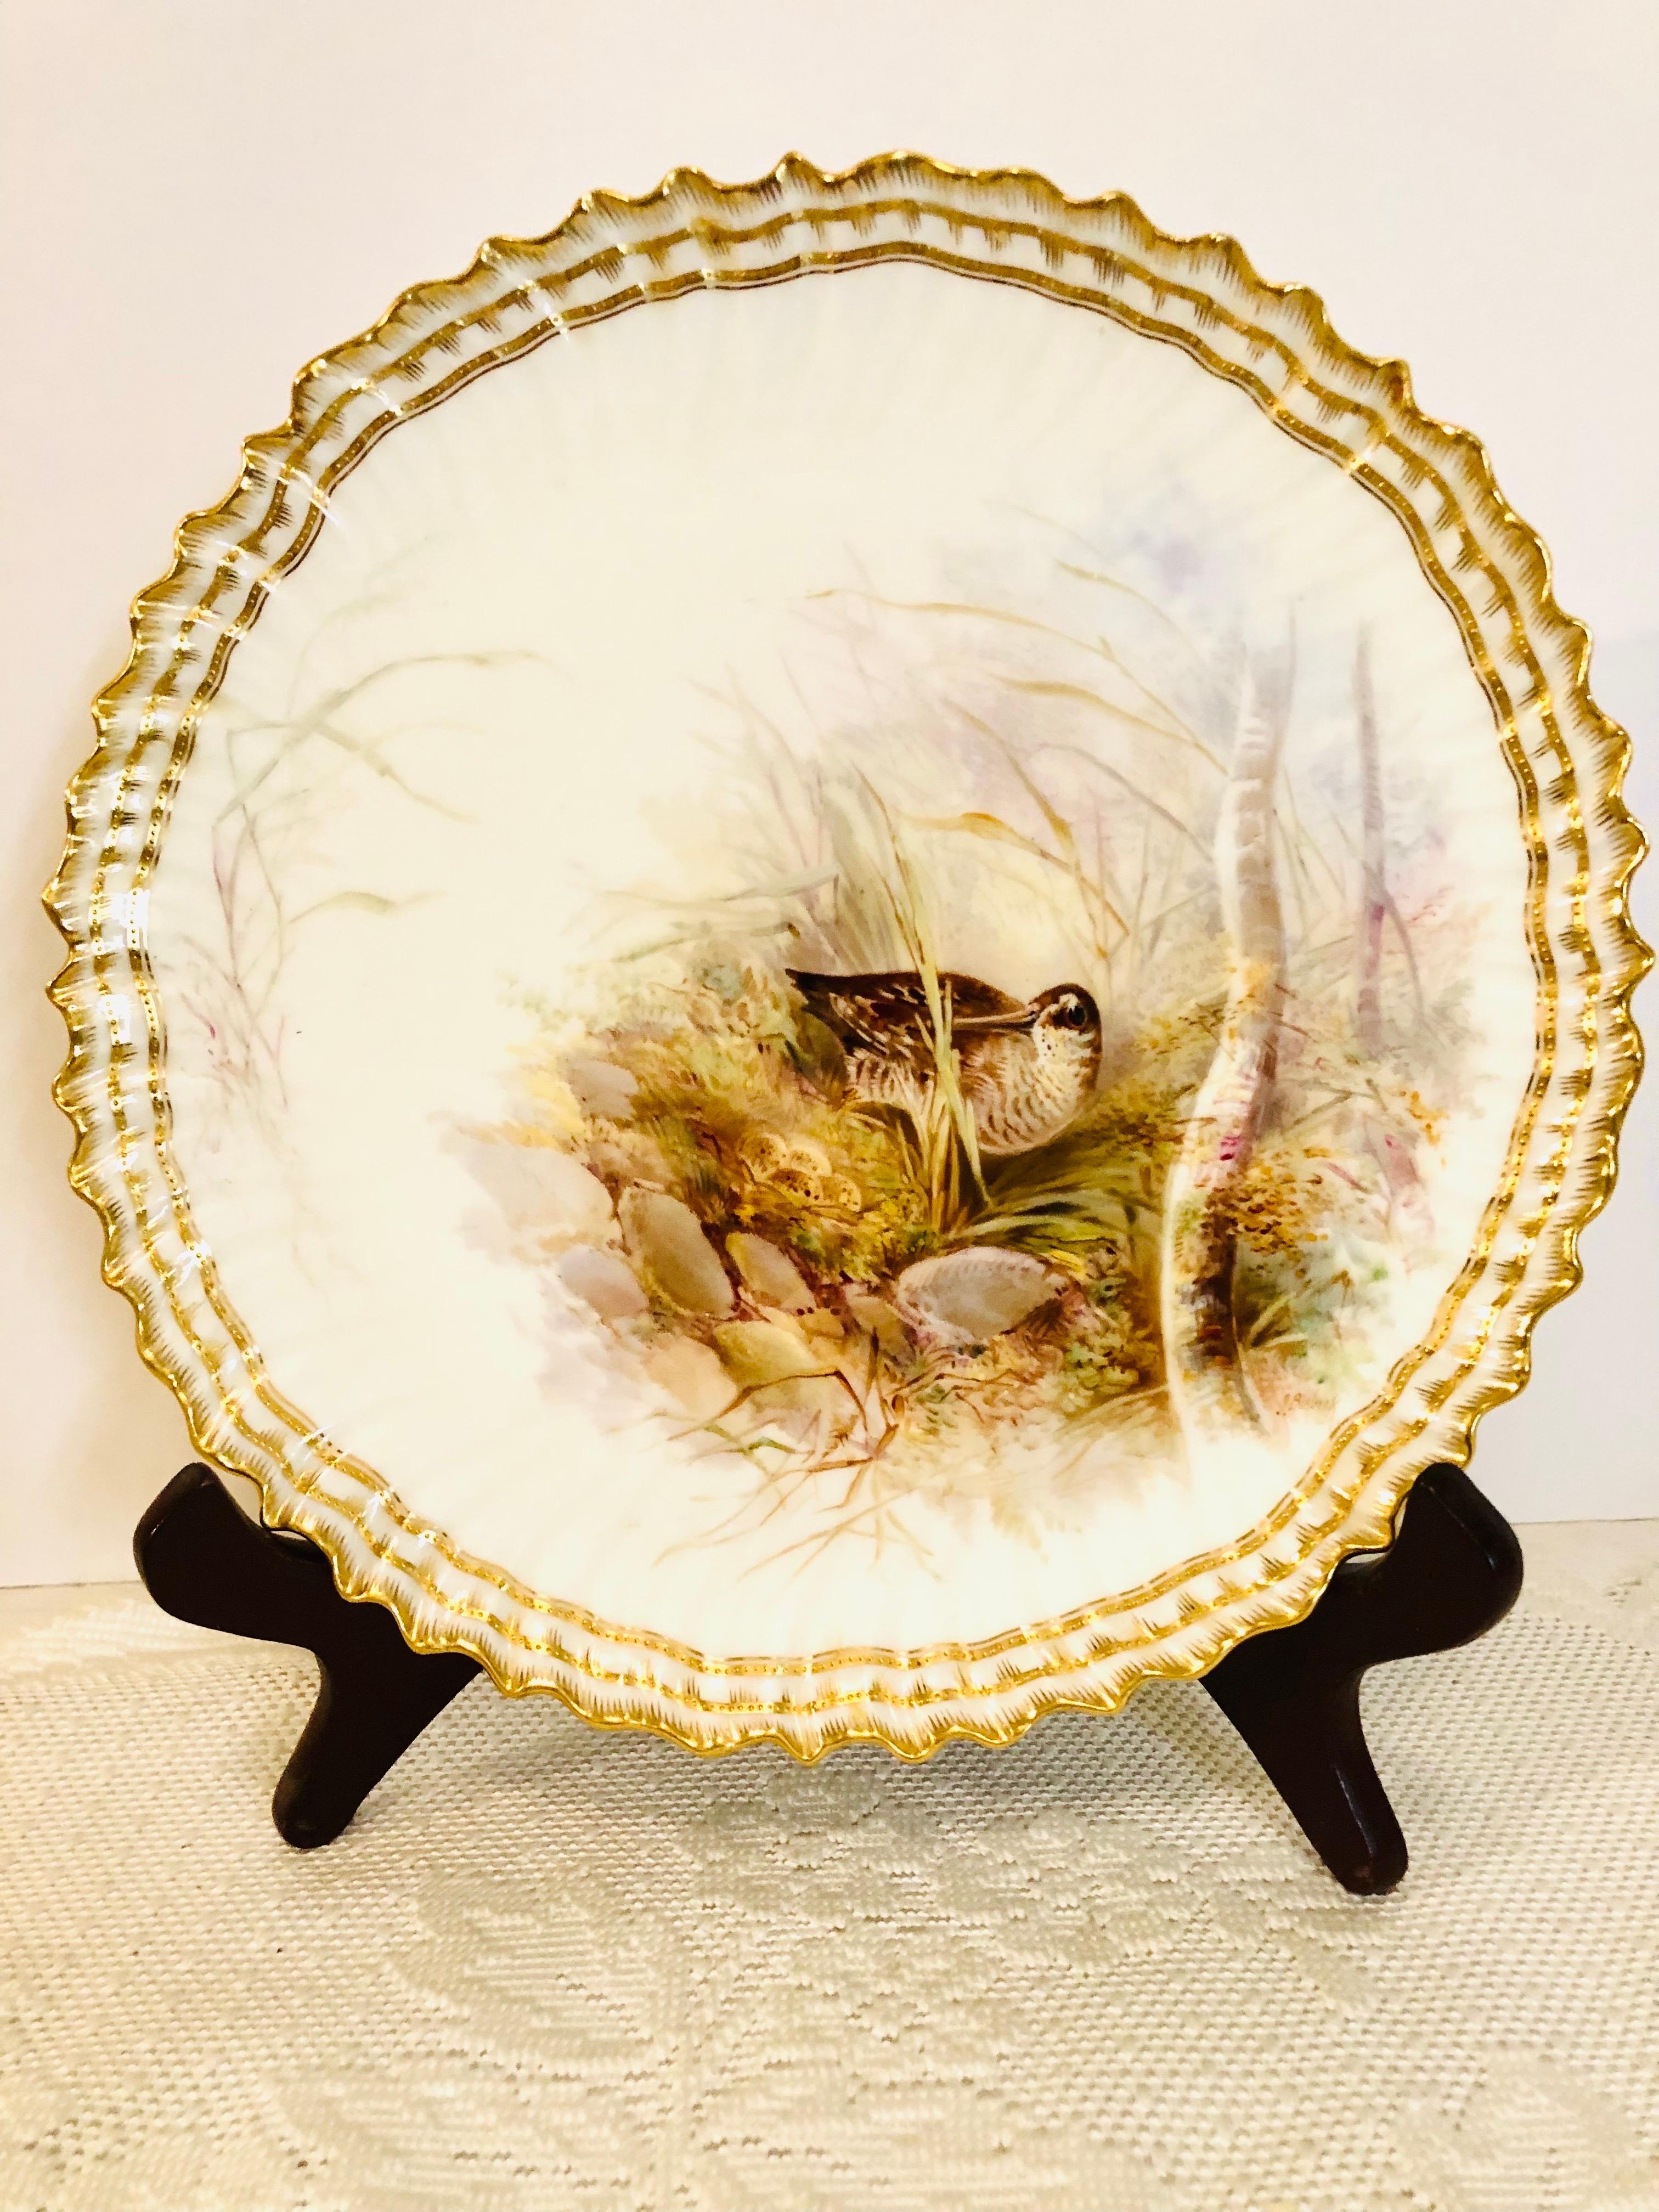 Set of 11 Cauldon Plates Each Painted Exquisitely With a Different Bird  10